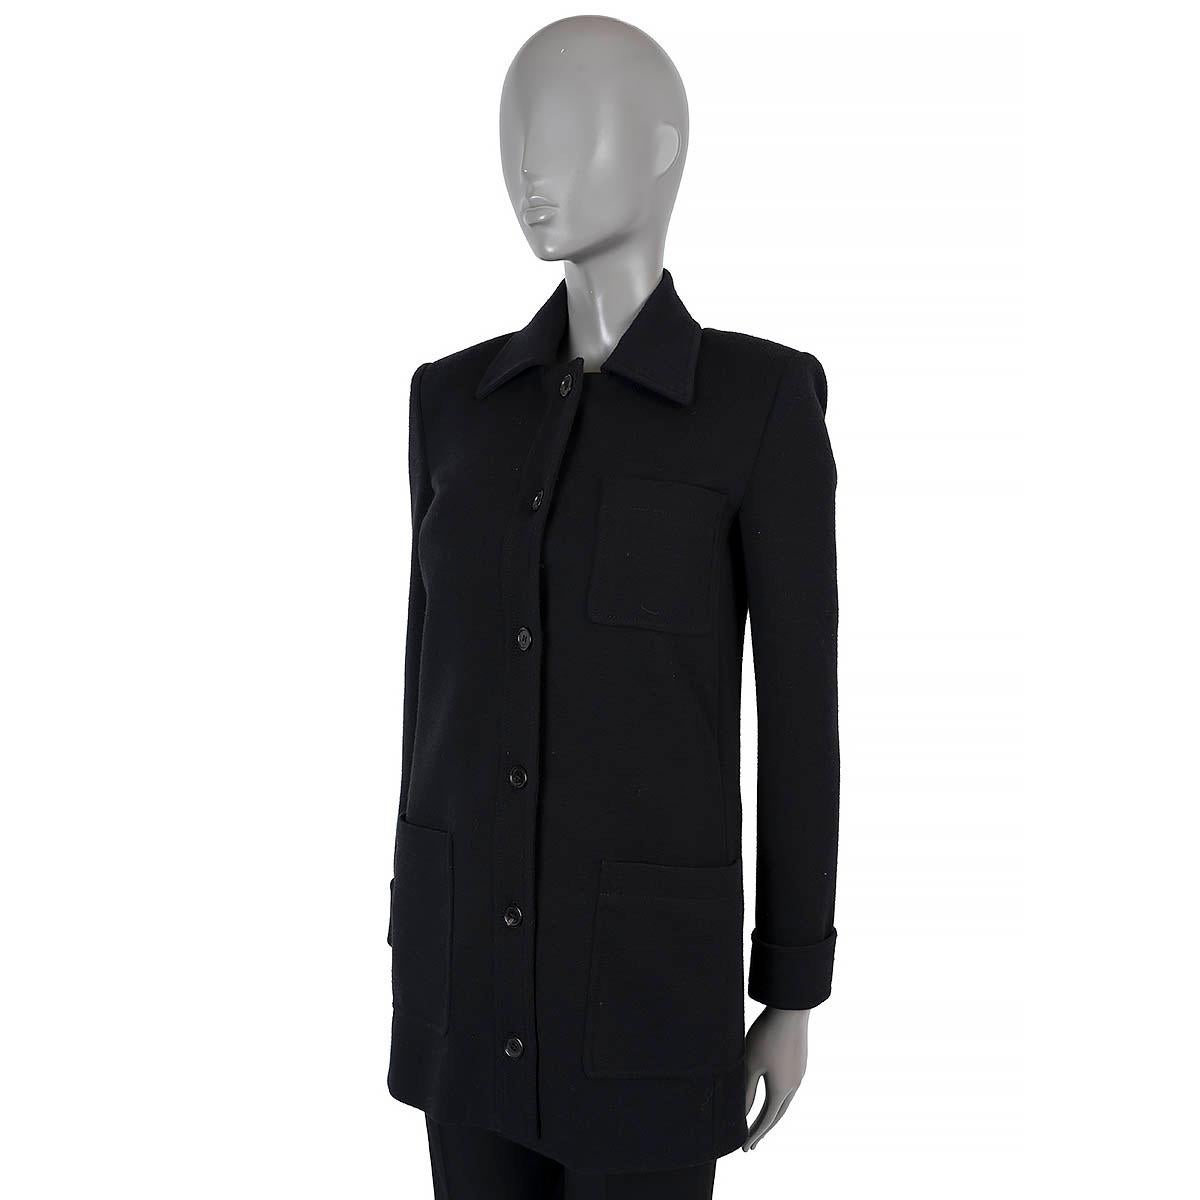 100% authentic Saint Lauren fitted jersey coat in black wool (80%) and polyamide (20%). Featyres twi patch pockets at the waist and one at the chest. Opens with six buttons on the front. Lined in silk (95%) and elastane (5%). Has been worn and is in